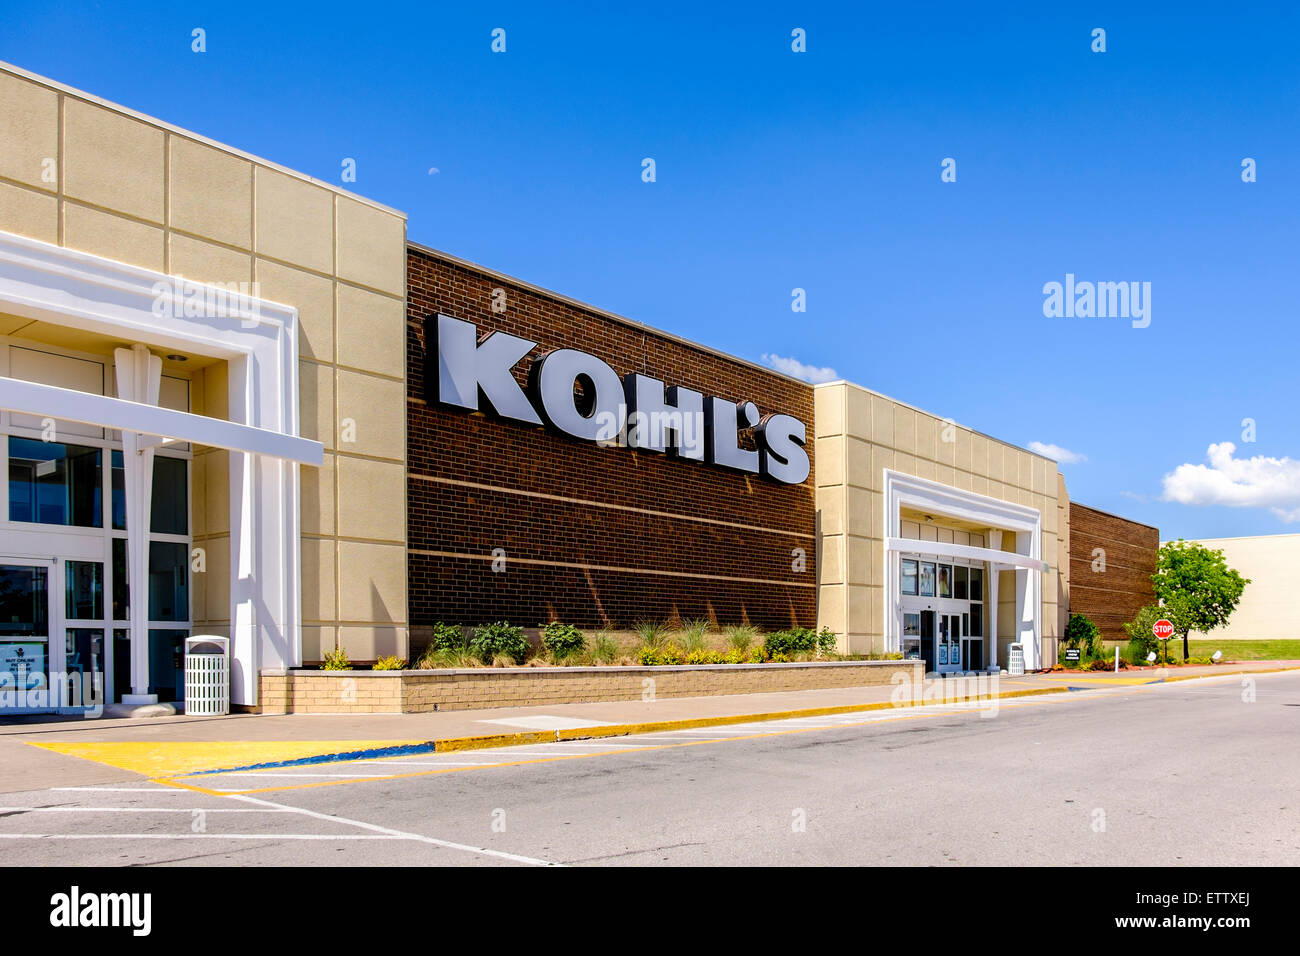 Take a Tour of the 2 Largest Kohls Stores in Rochester NY